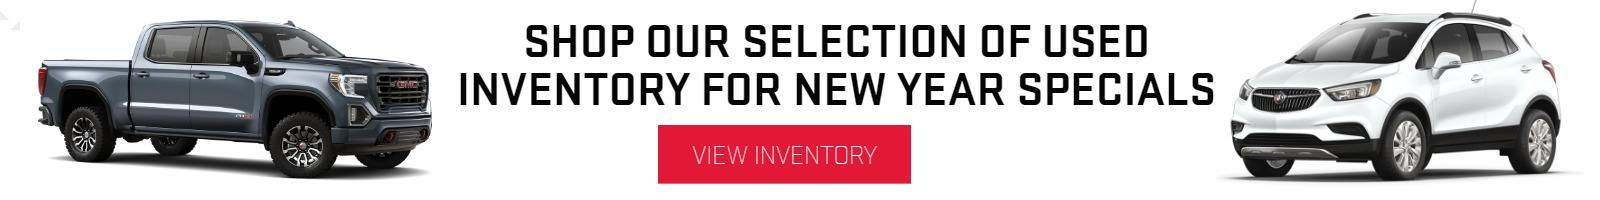 Shop Our Selection of Used Inventory for Spring Specials